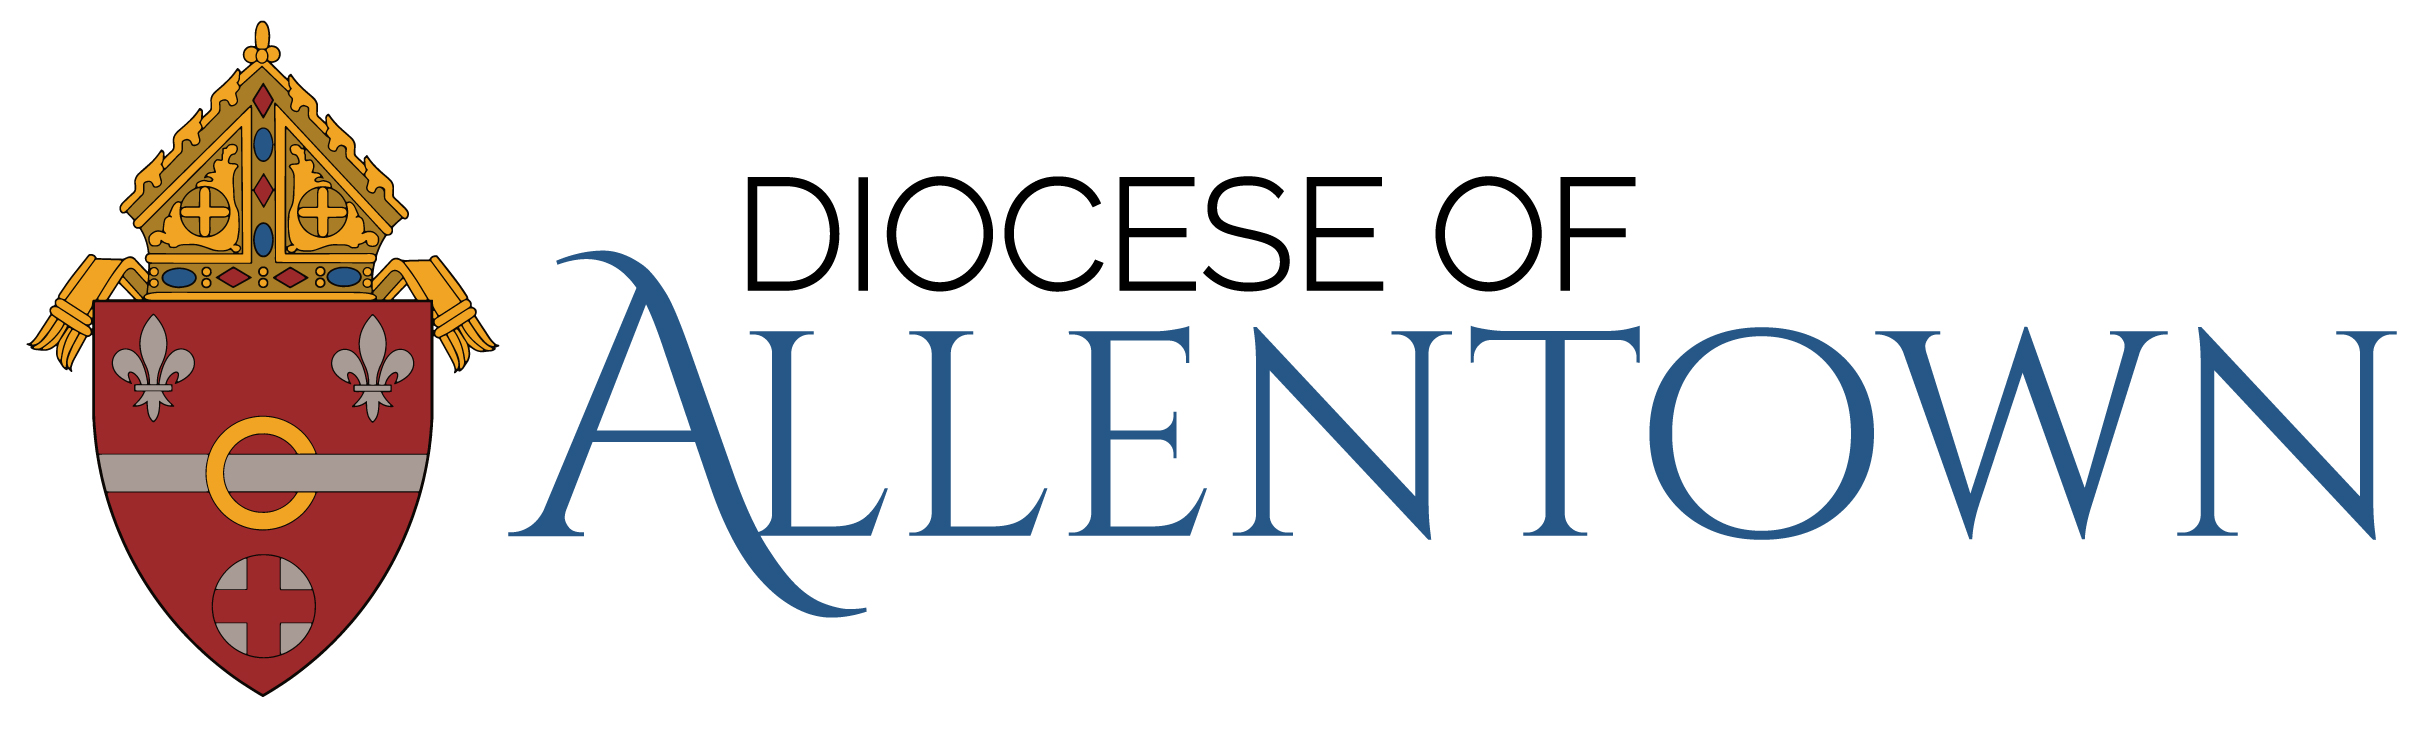 The Diocese of Allentown